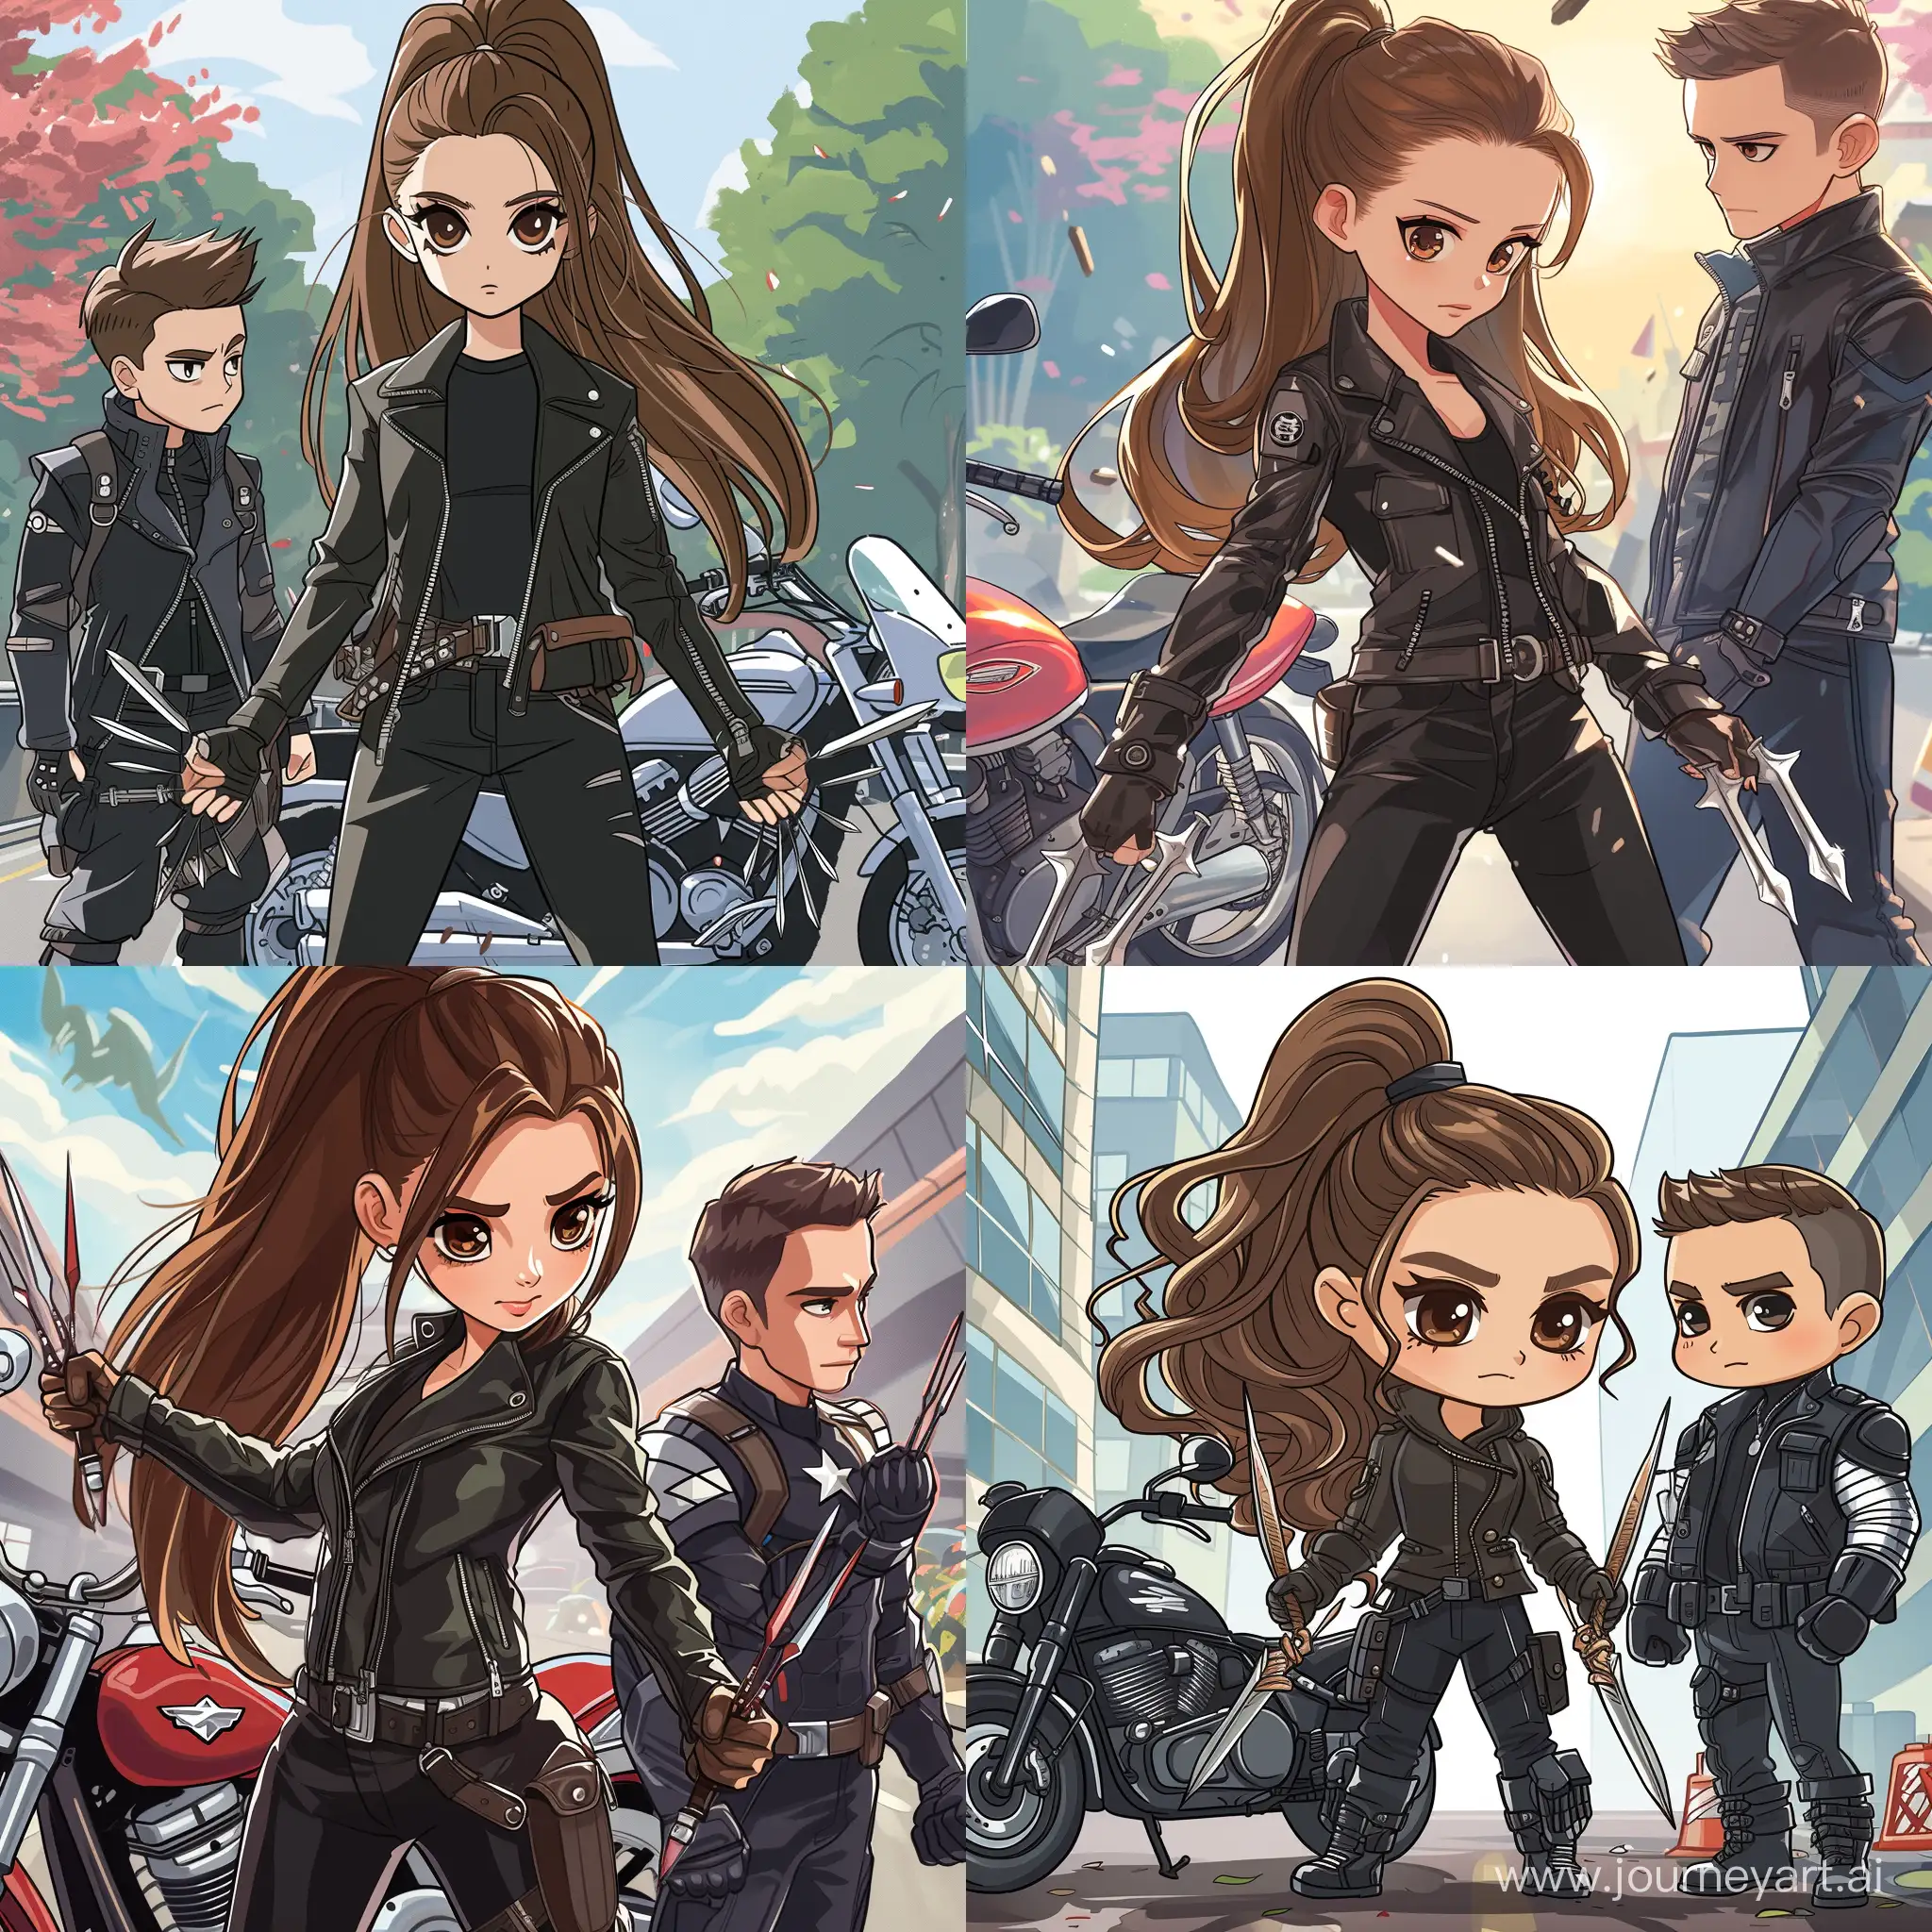 15 year old girl, brown long hair in high ponytail, brown eyes, black leather jacket, black pants, fancy throwing knives in each hand, by a motorcycle, the winter soldier by her, the winter soldier has short hair, cartoon style